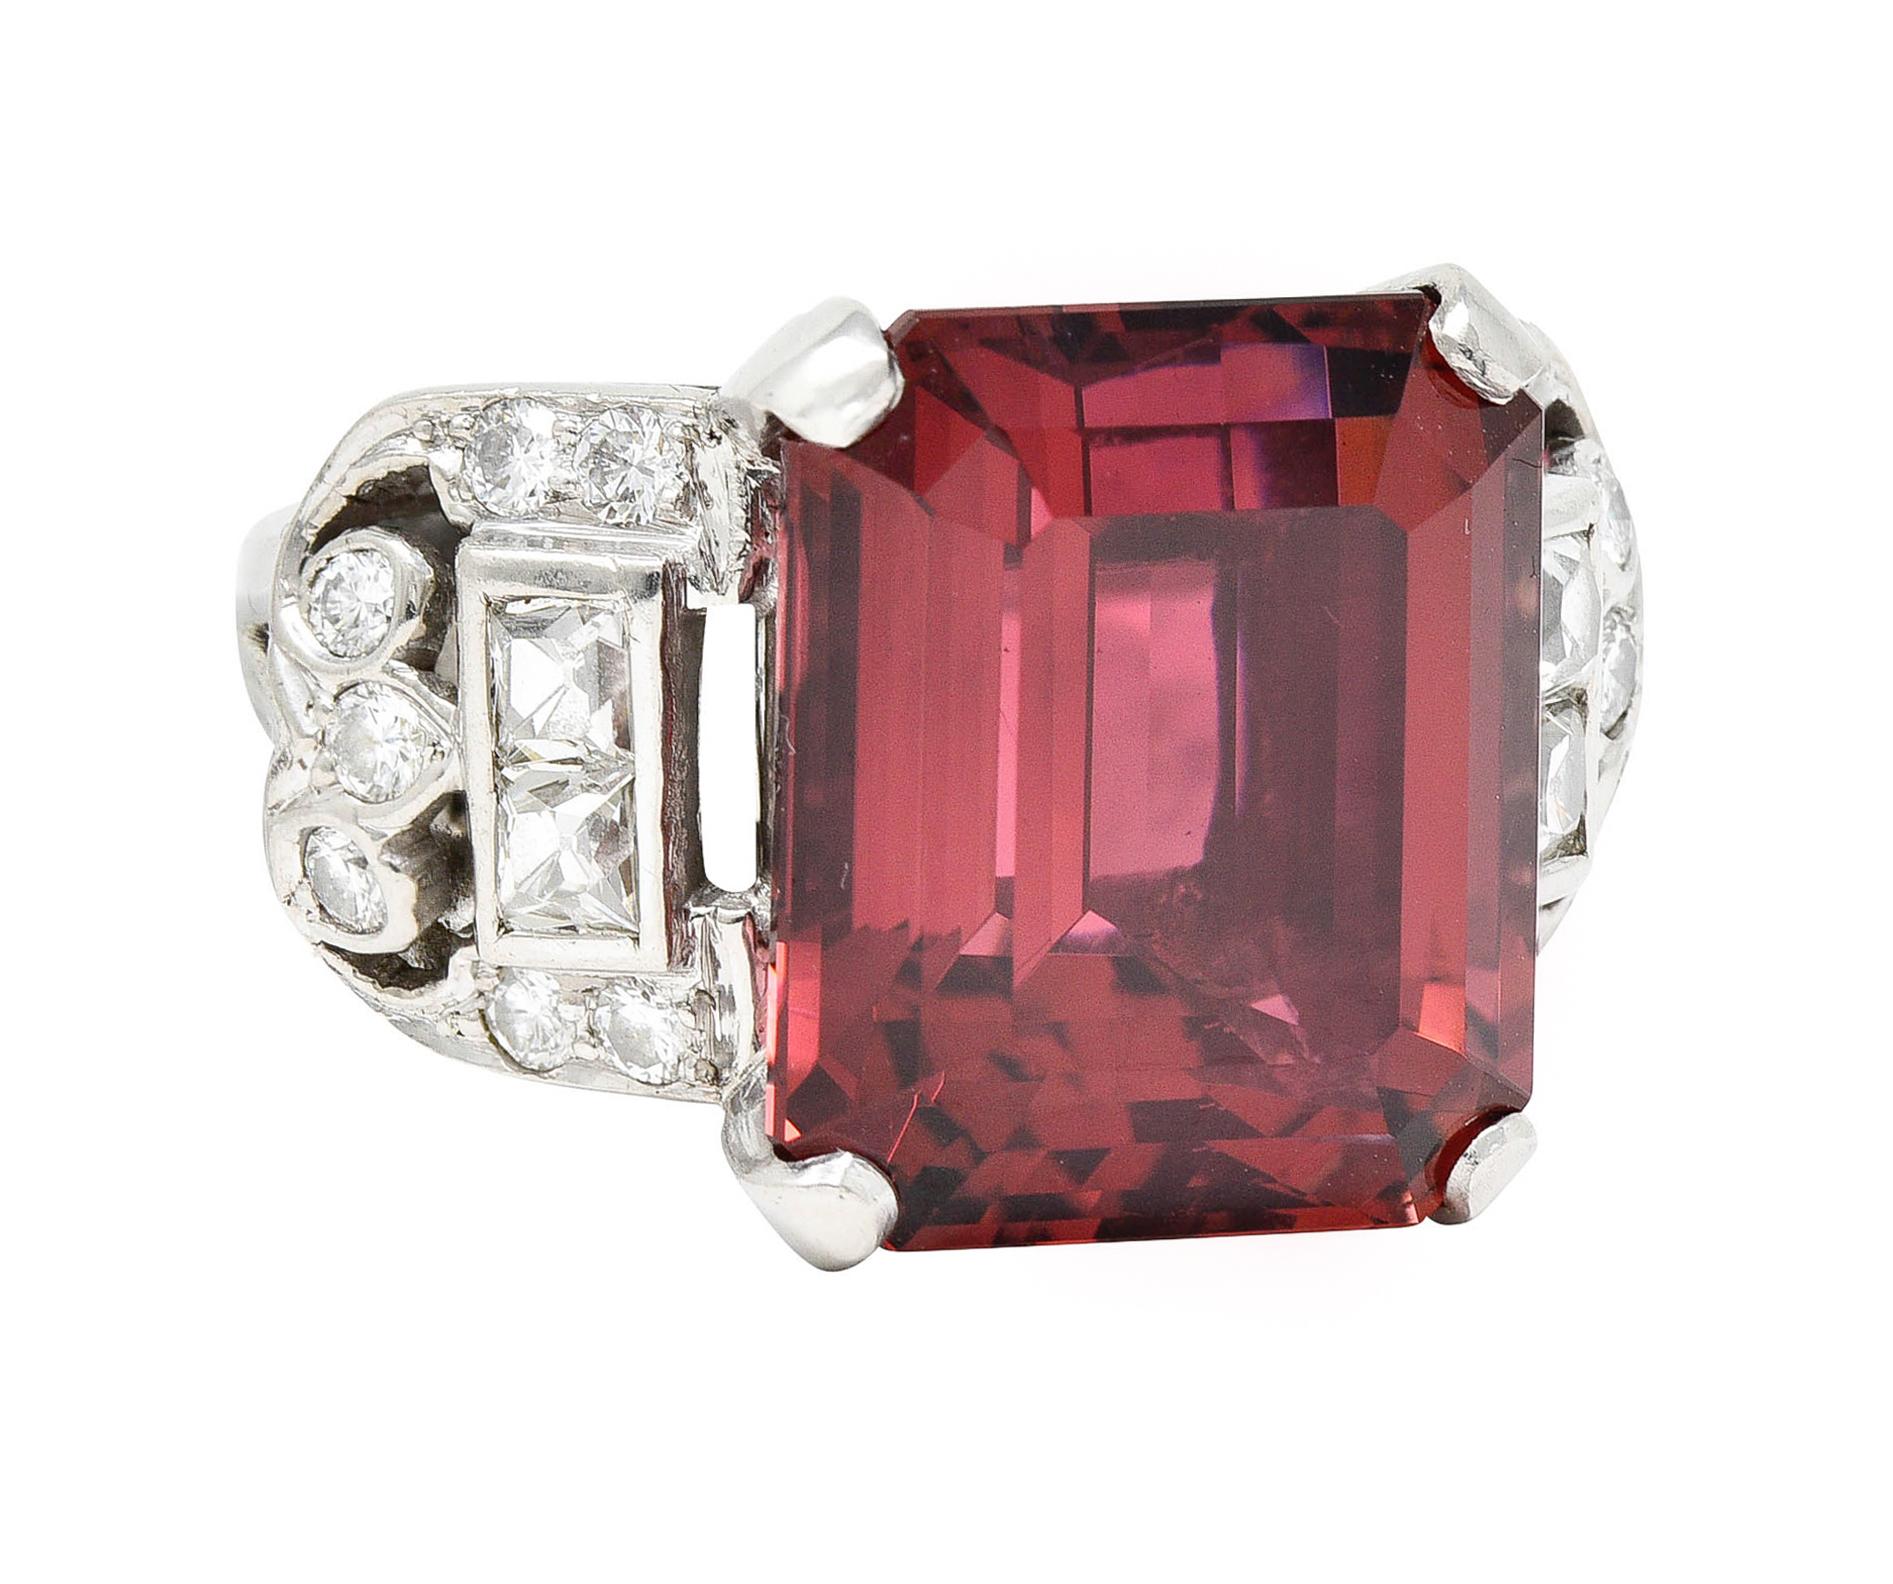 Featuring a substantial emerald cut rubellite tourmaline weighing 16.61 carats

Transparent with saturated violetish red color

Basket set by wide prongs and flanked by stylized ribbon-esque cathedral shoulders

With French cut and round brilliant